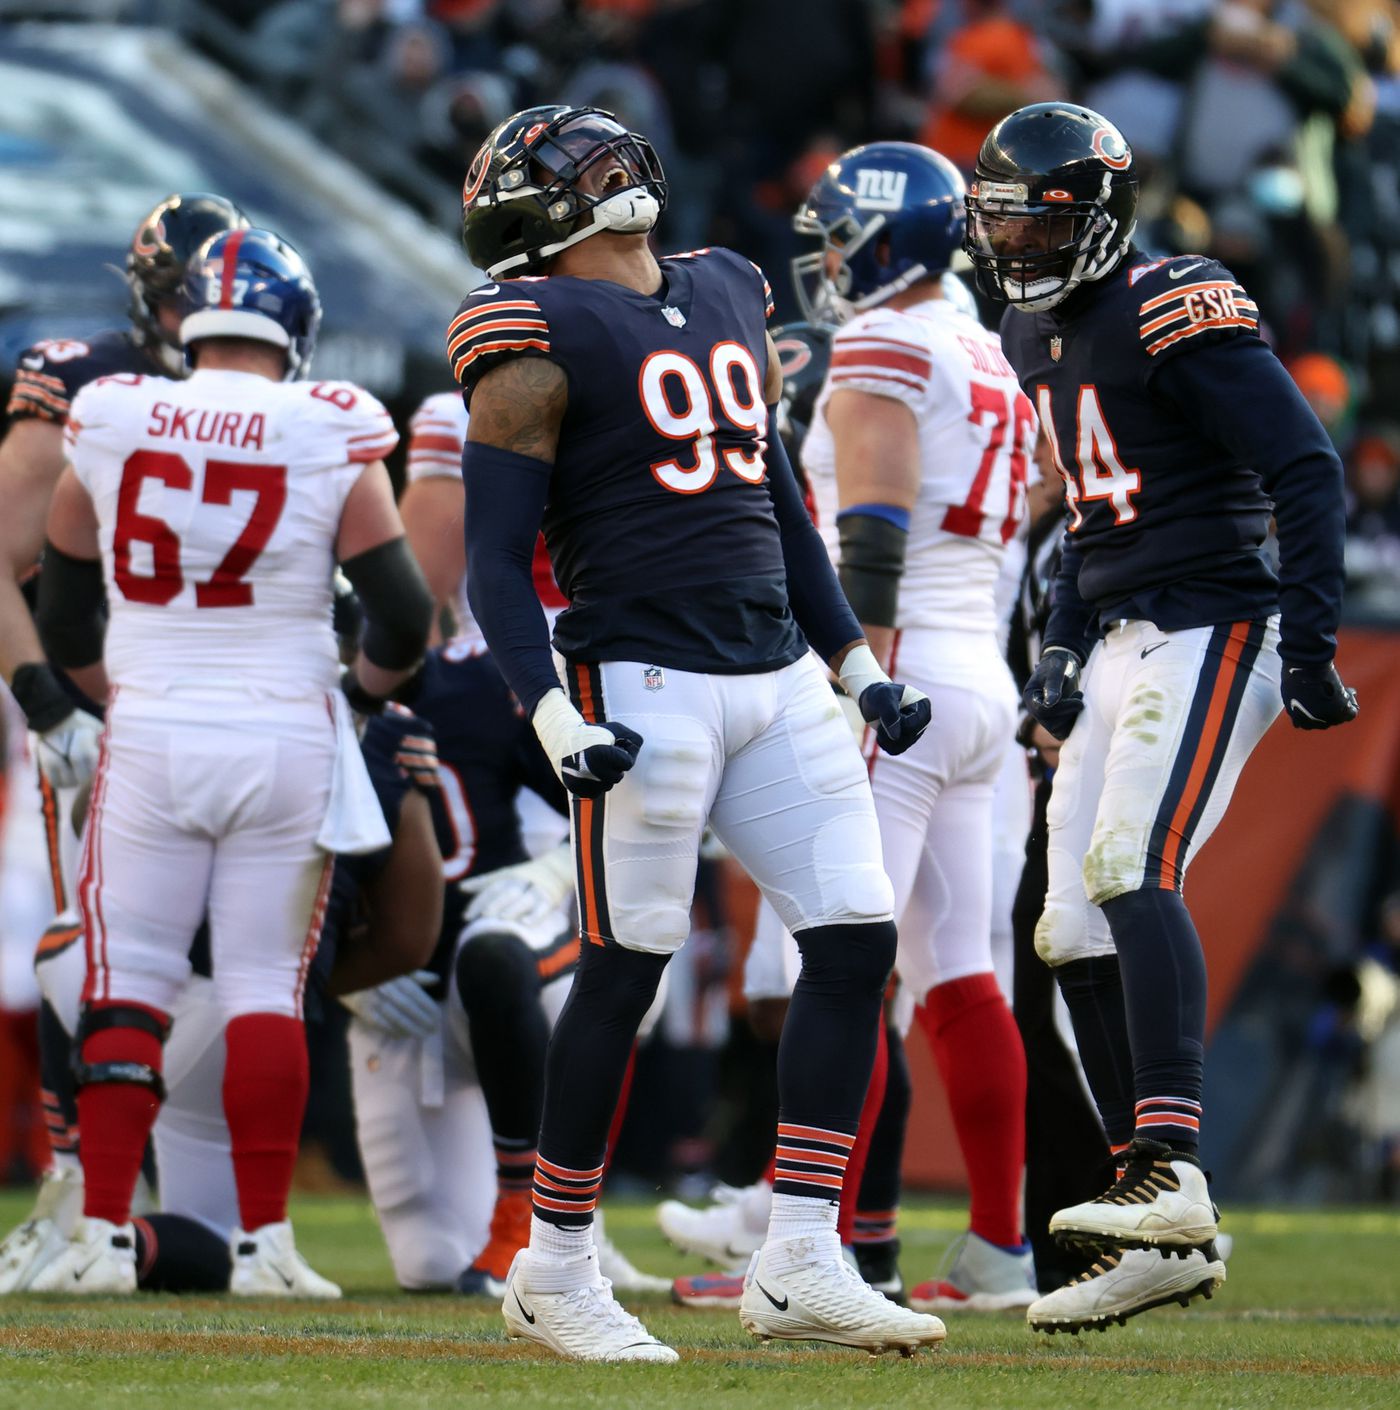 Bears outside linebacker Trevis Gipson celebrates his strip sack of Giants quarterback Mike Glennon in the third quarter on Jan. 2, 2022 at Soldier Field.